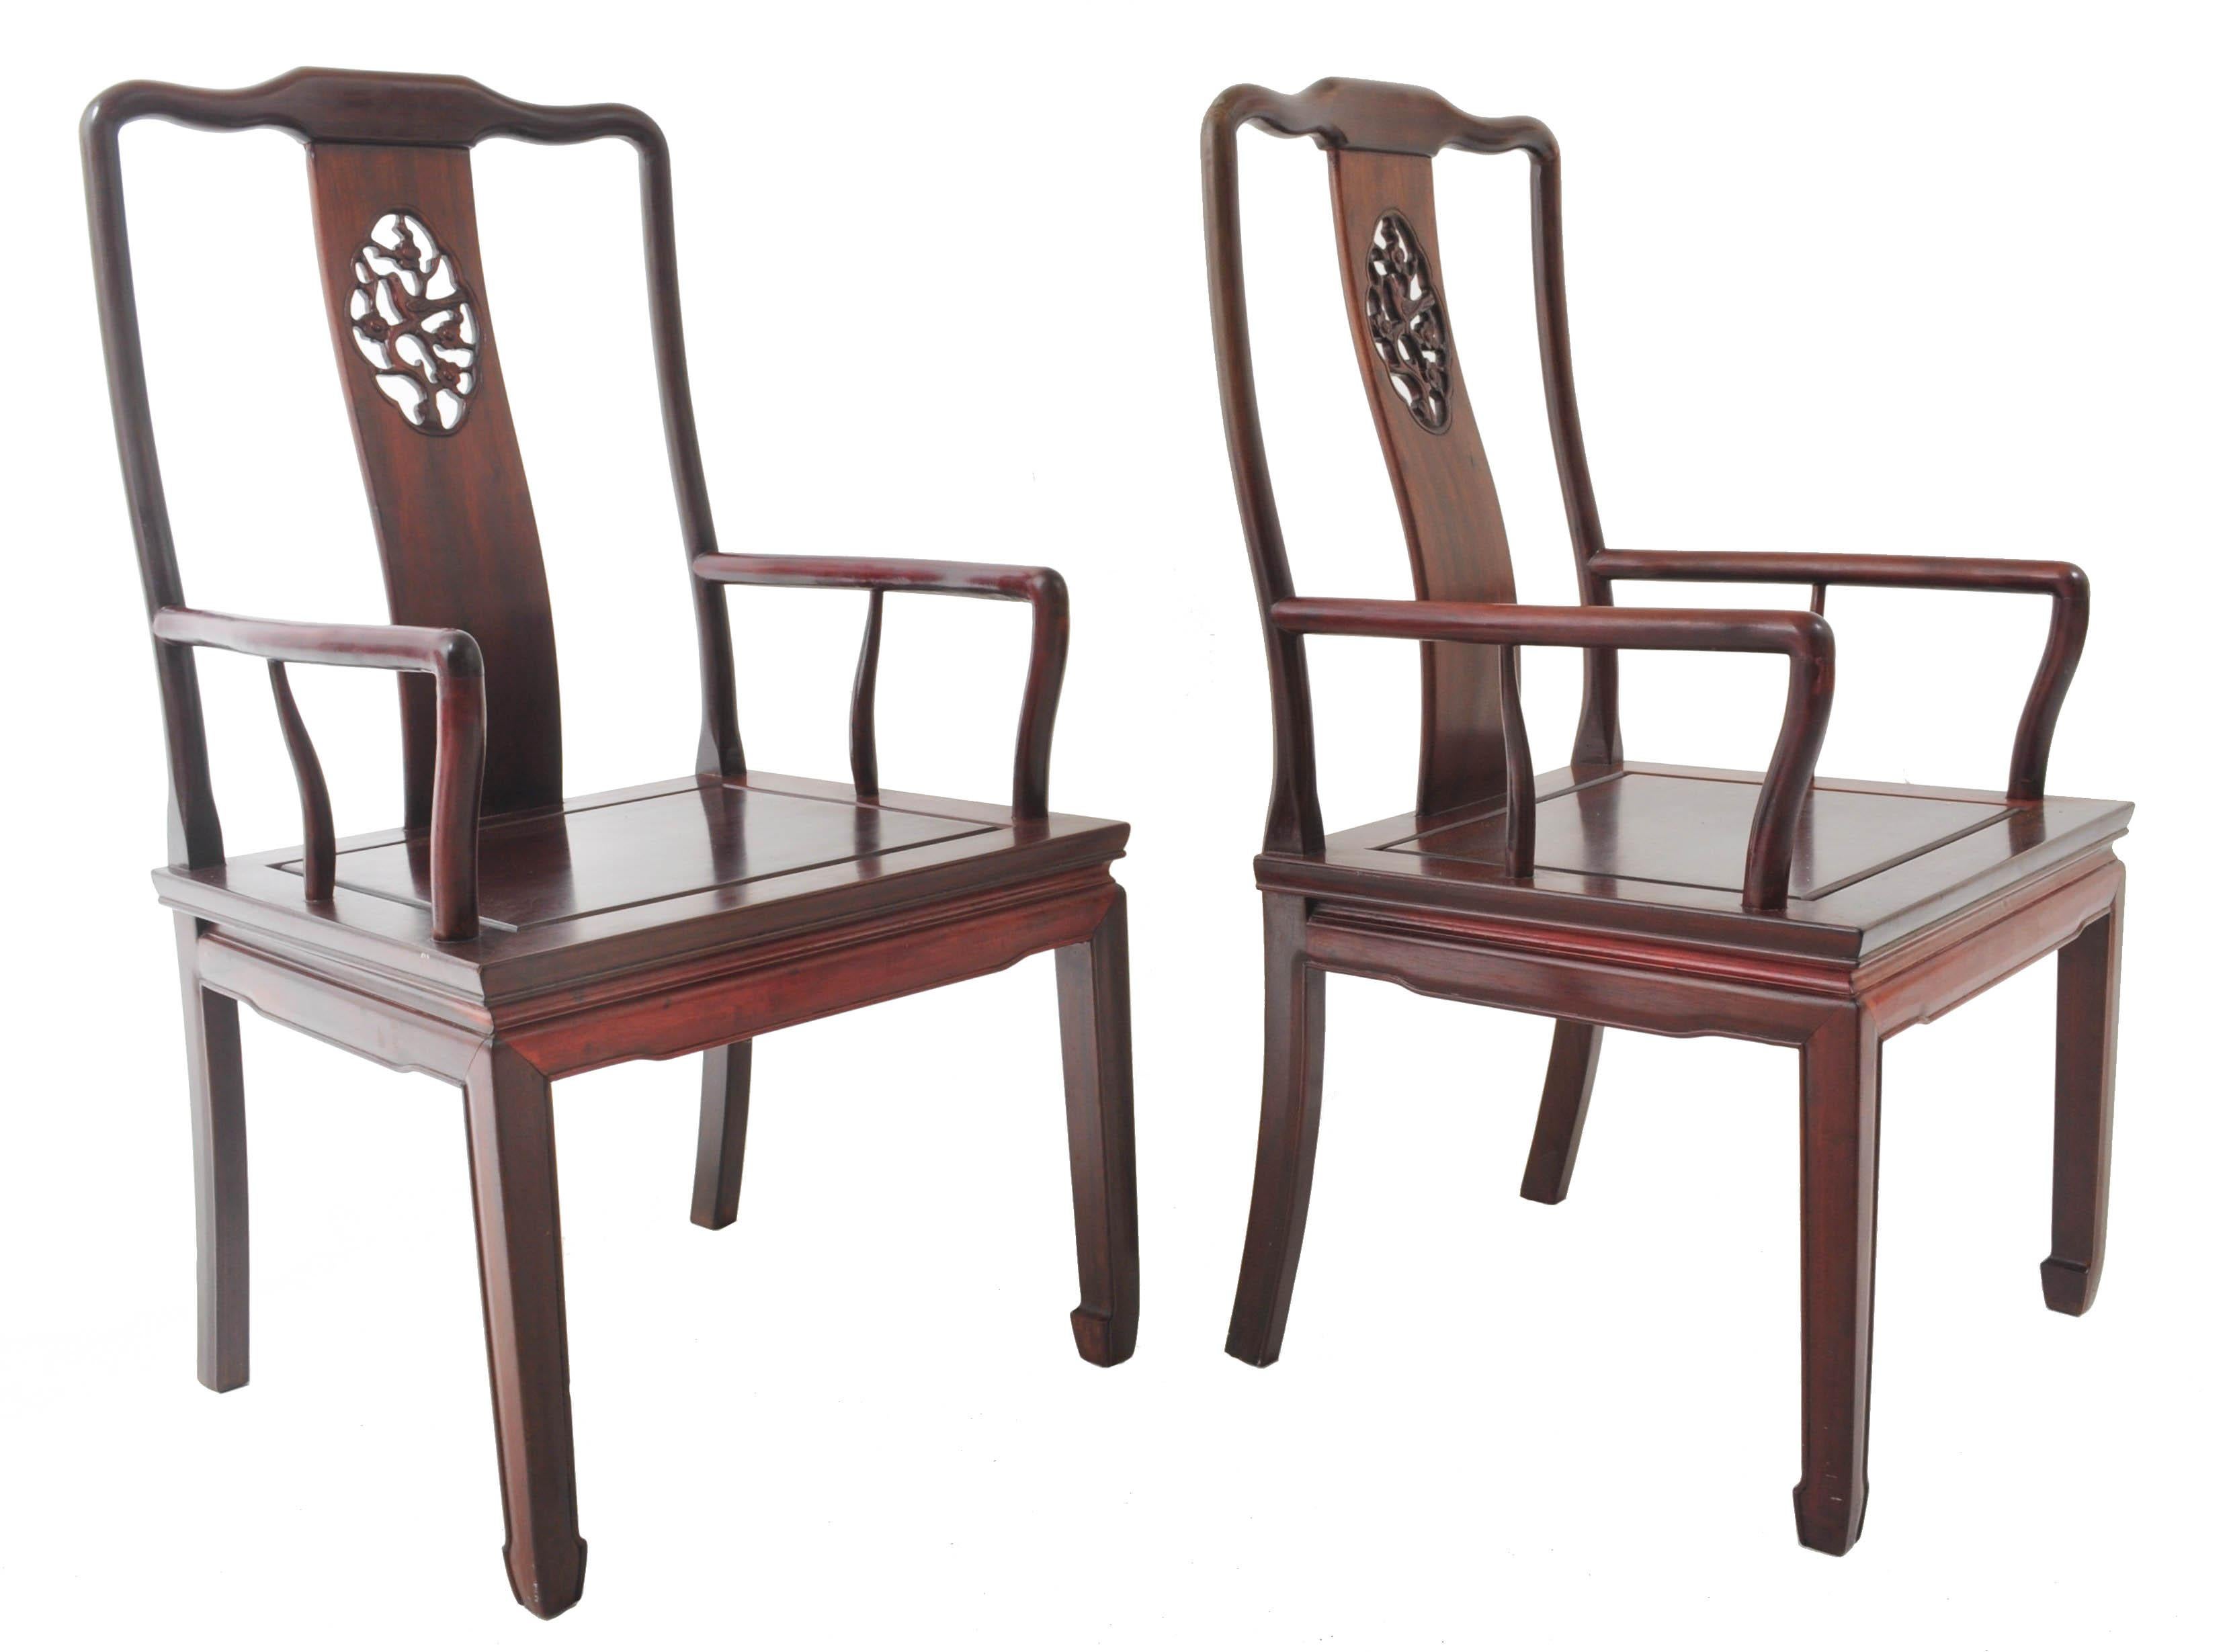 Pair of antique Chinese Chippendale rosewood armchairs, Qing Dynasty, circa 1900. The chairs having splat backs that are pierced and carved, the arms supported by a single rail. The chairs standing on shaped feet.